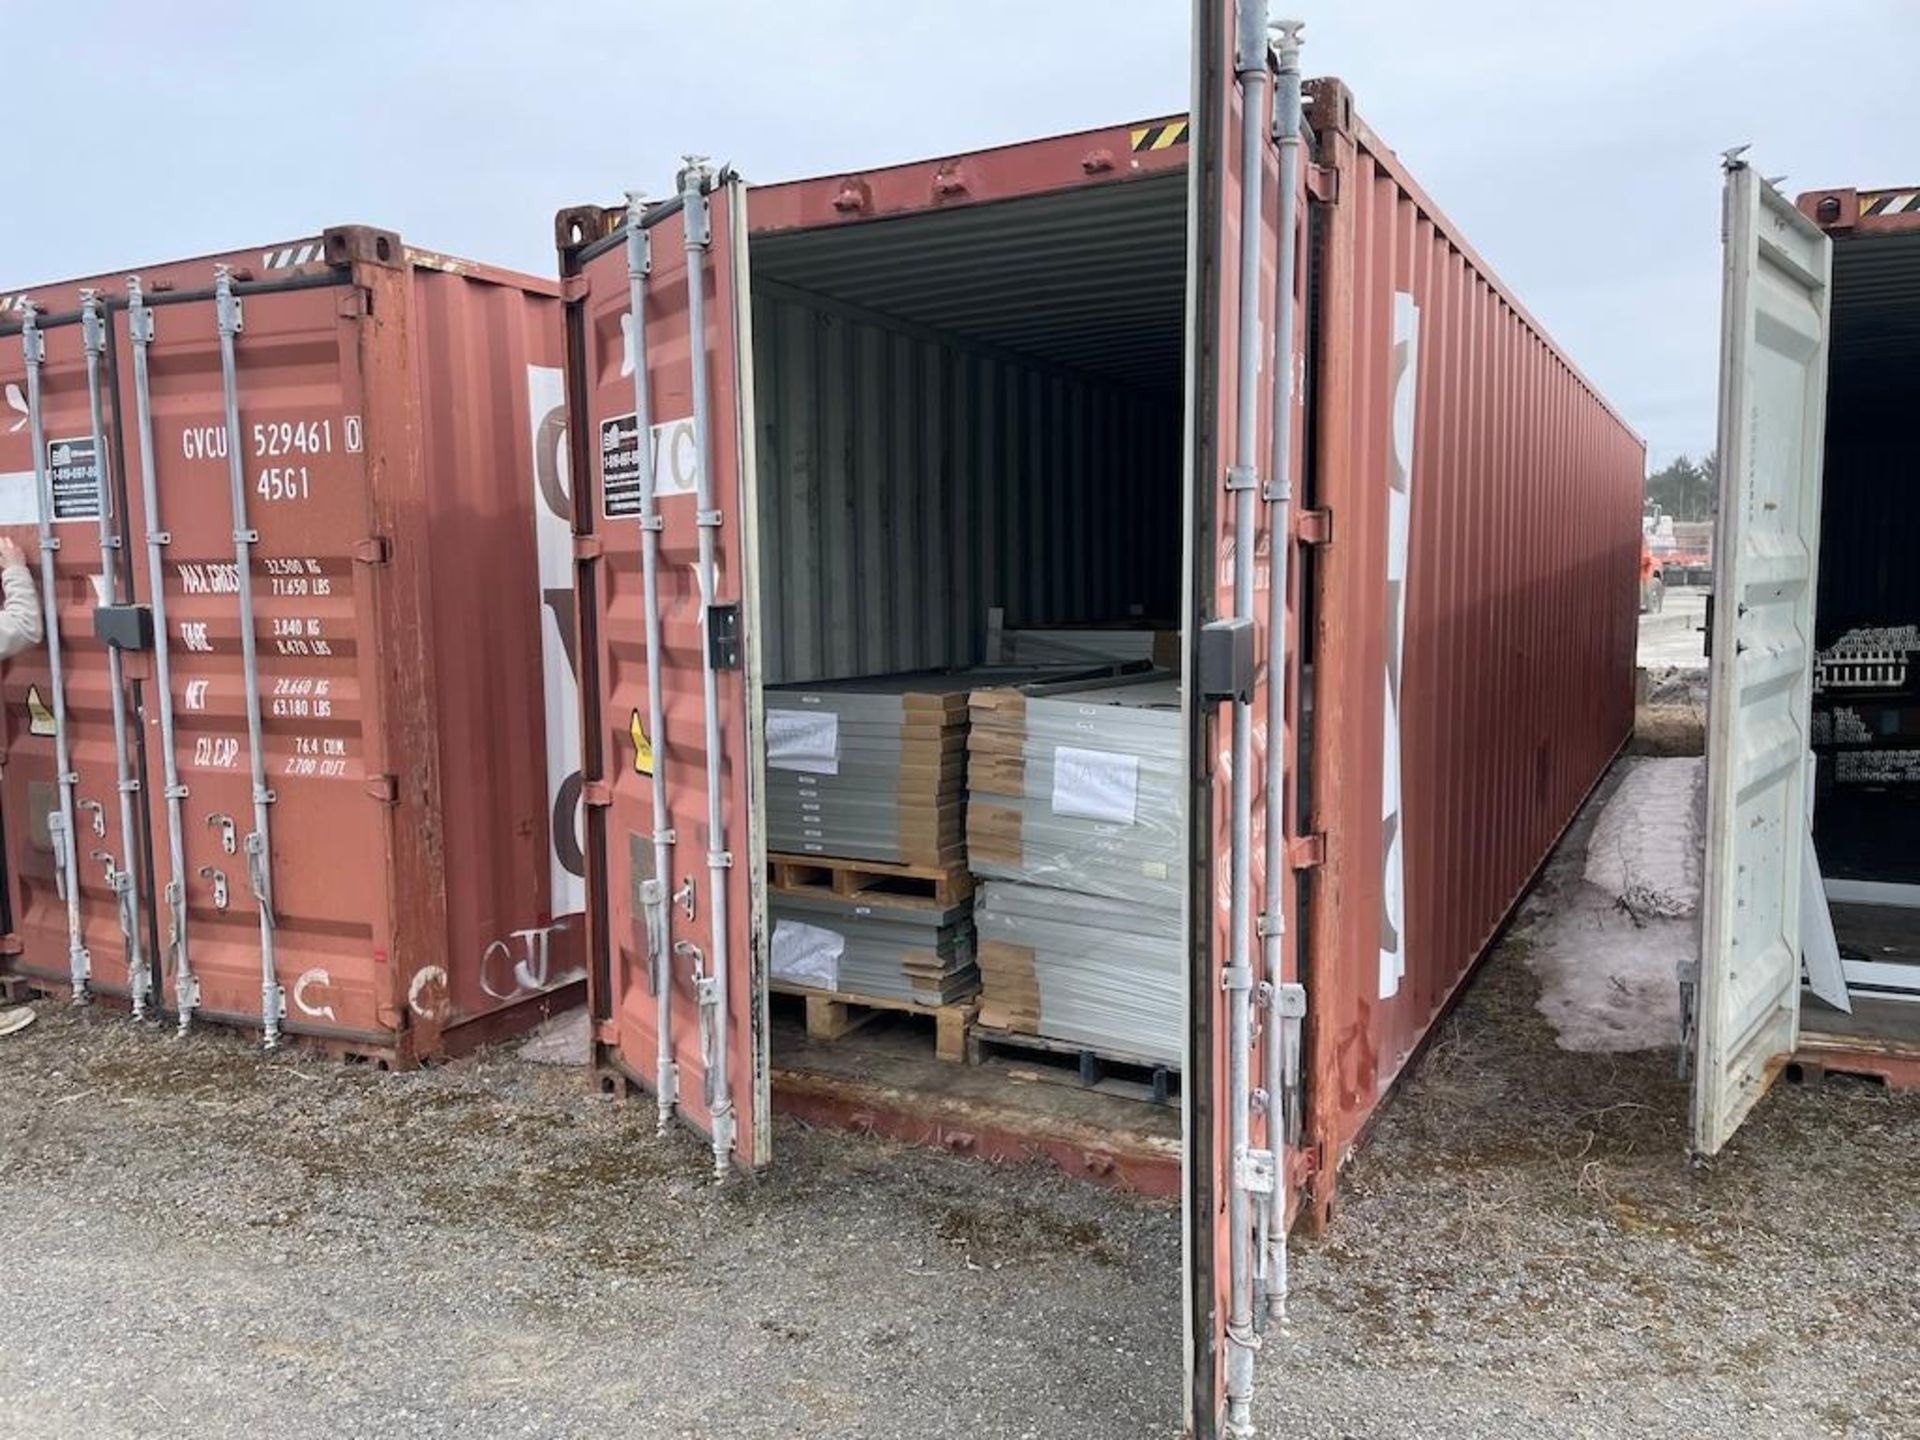 40 FT SEA CONTAINER, EXCLUDING CONTENTS, DELAYED PICK UP UNTIL MAY 13 [8] [TROIS RIVIERES] *PLEASE N - Image 2 of 5